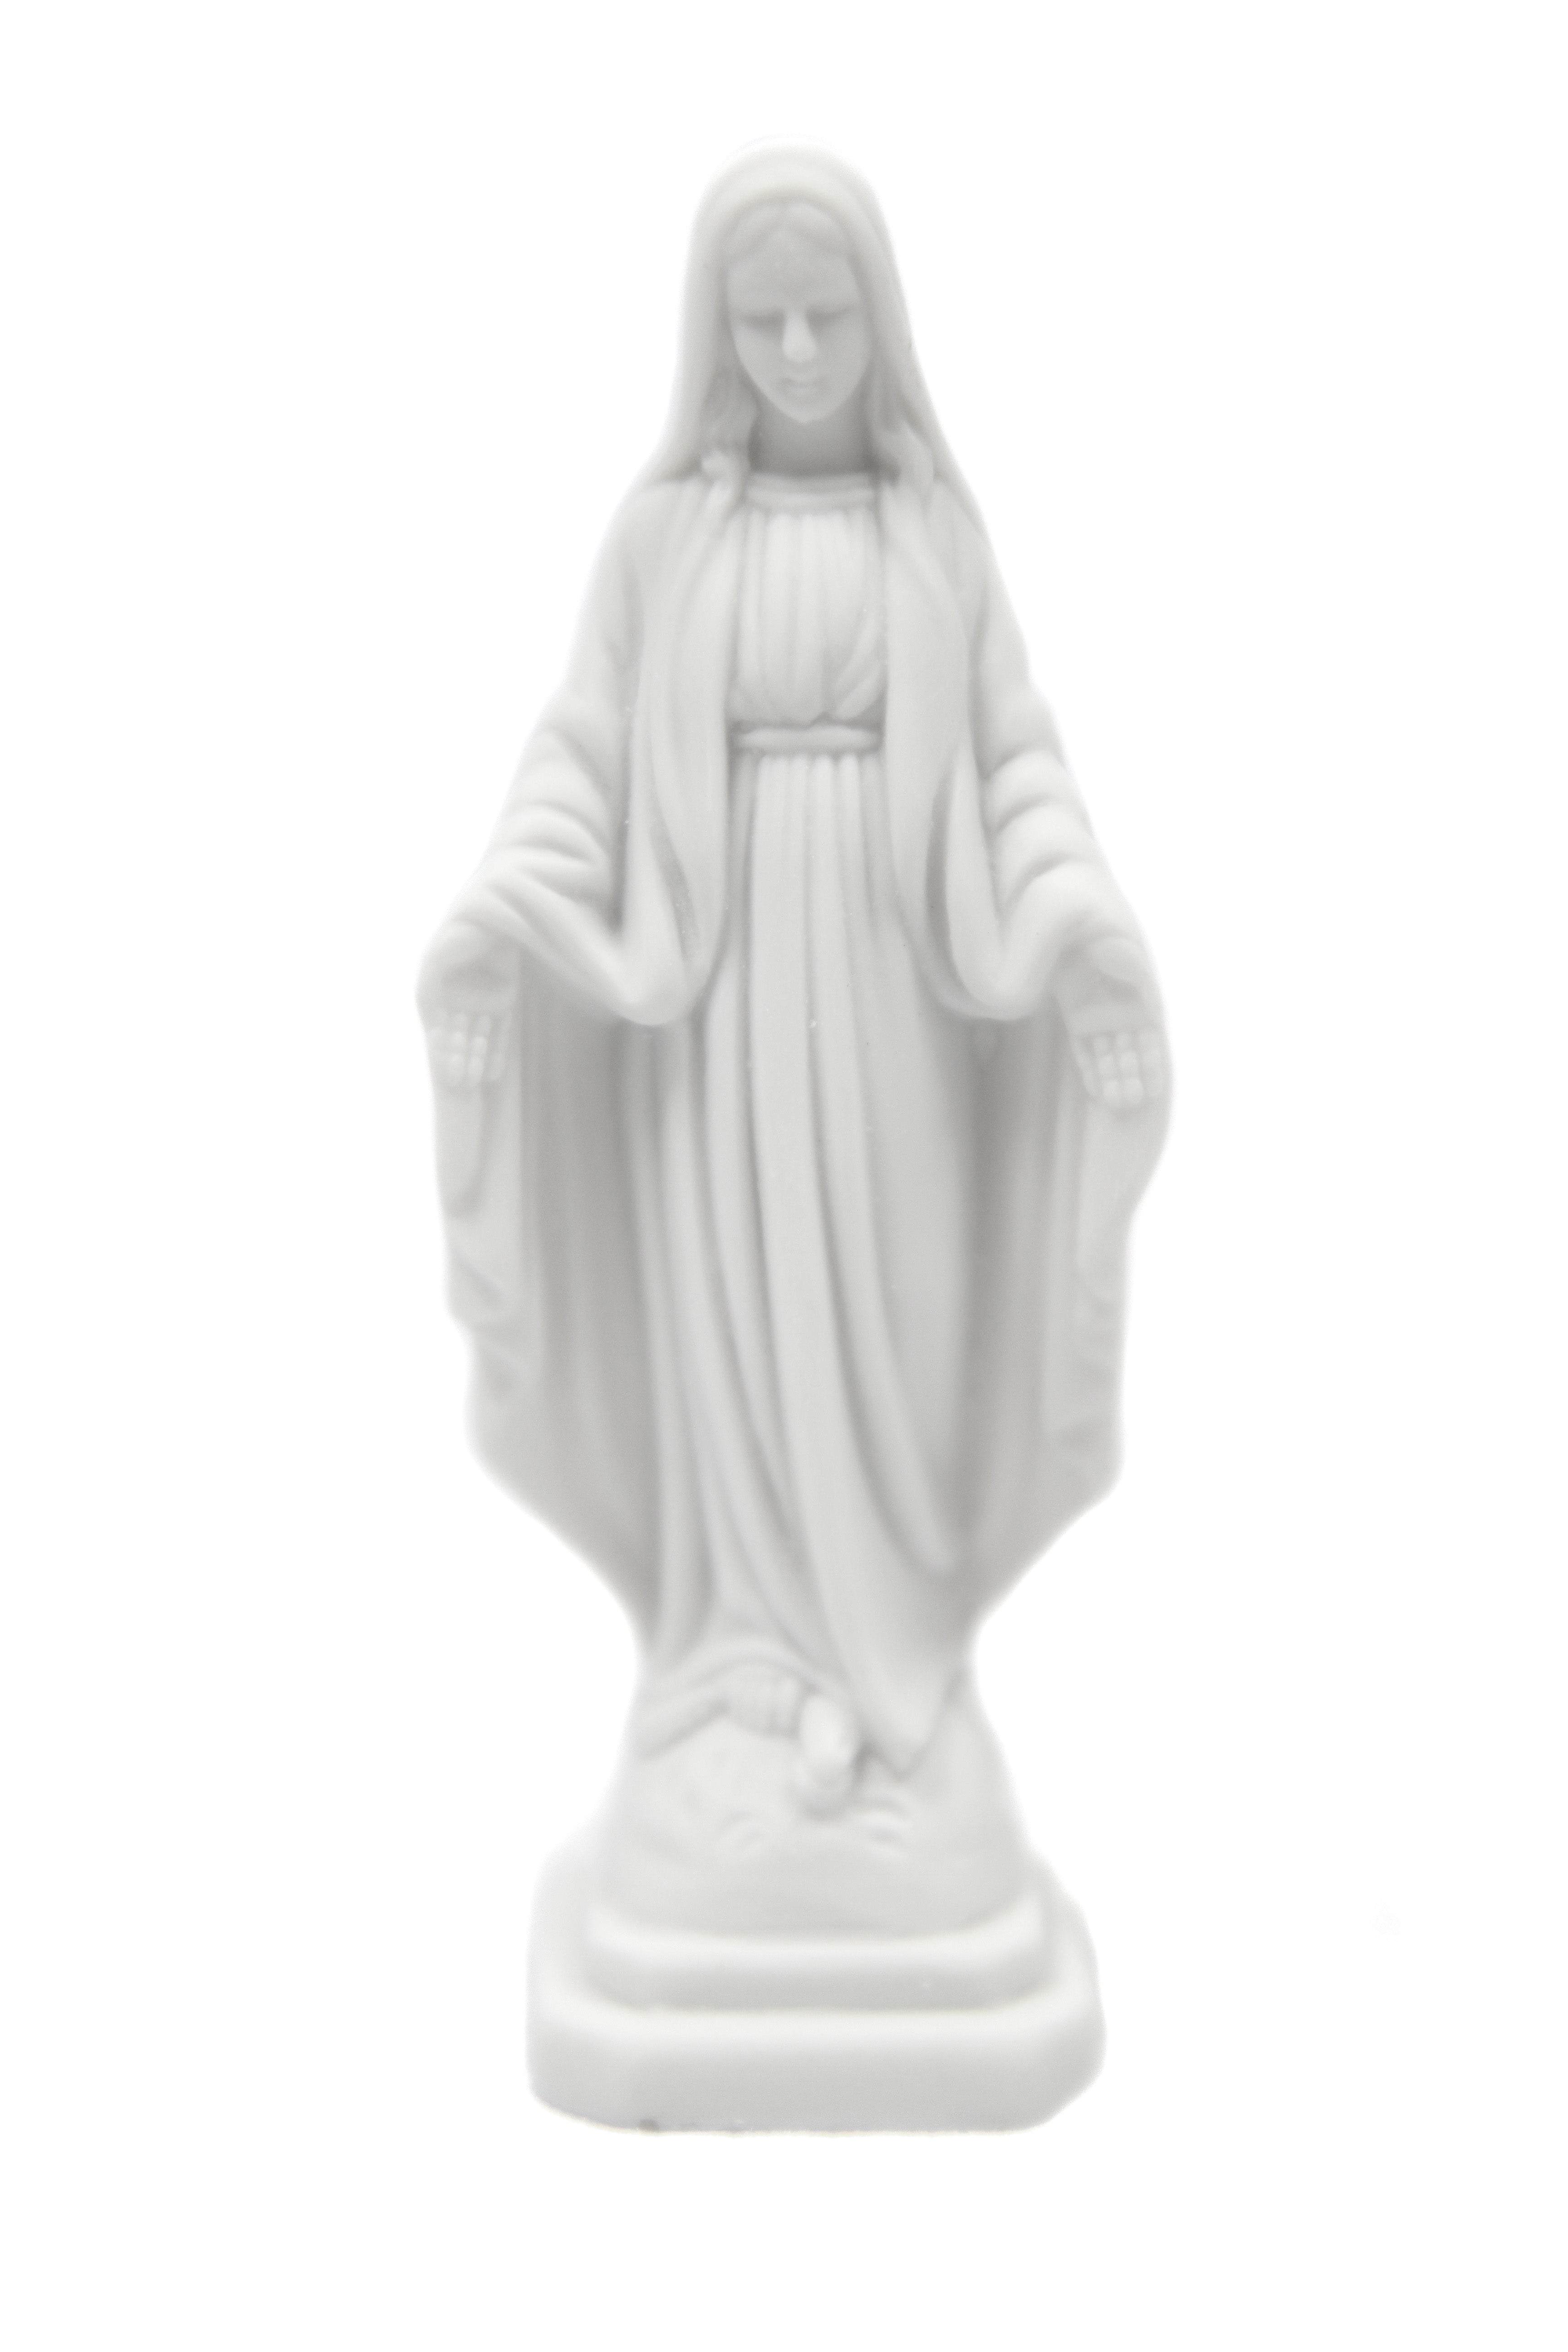 4.25 Inch Our Lady of Grace Virgin Mary Catholic Statue Vittoria Collection Made in Italy